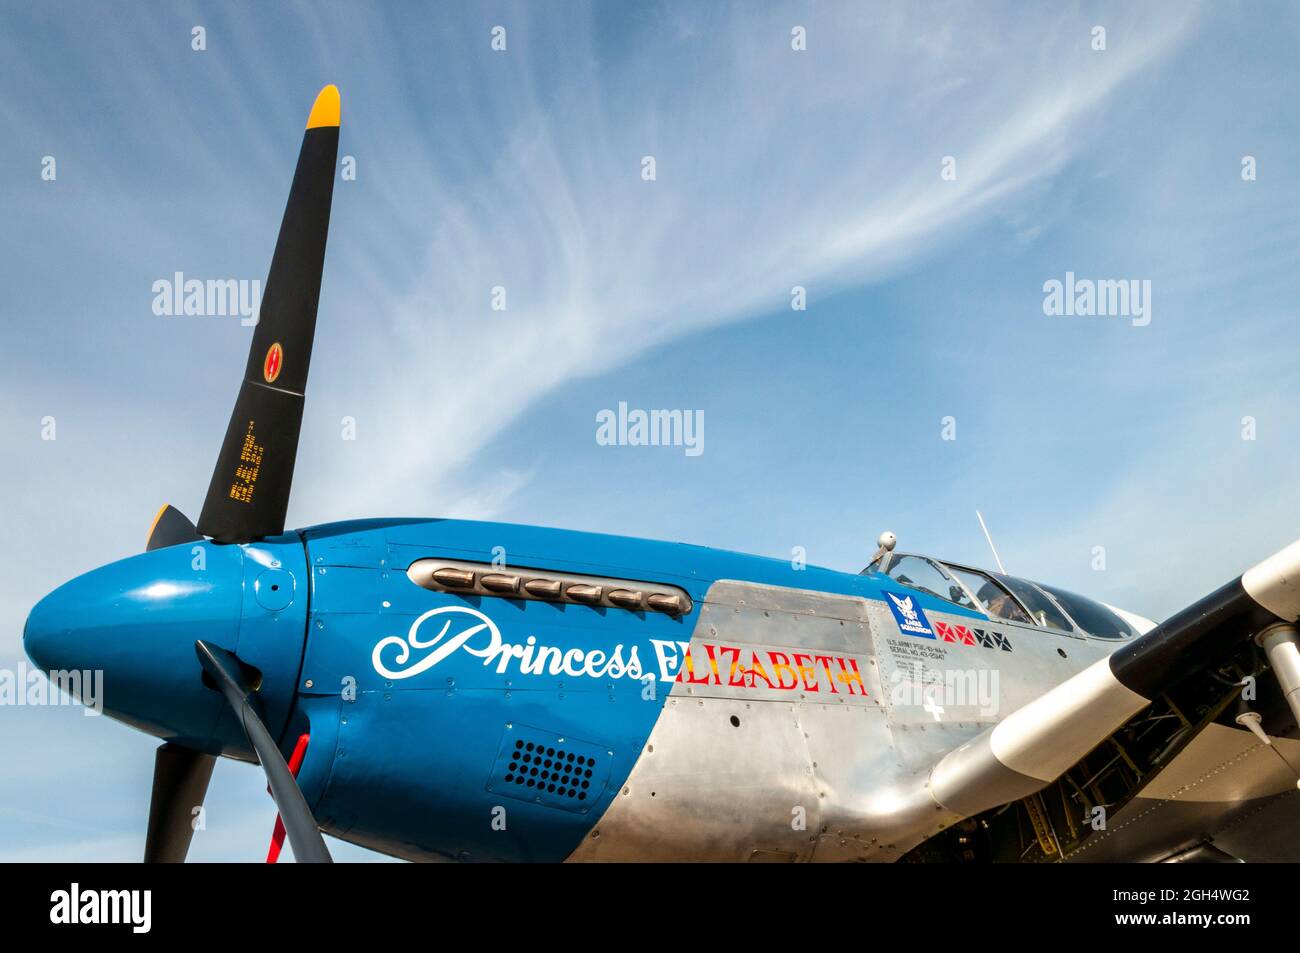 North American P-51 Mustang fighter plane named Princess Elizabeth. Blue nosed Second World War US fighter plane in blue sky with wispy clouds Stock Photo